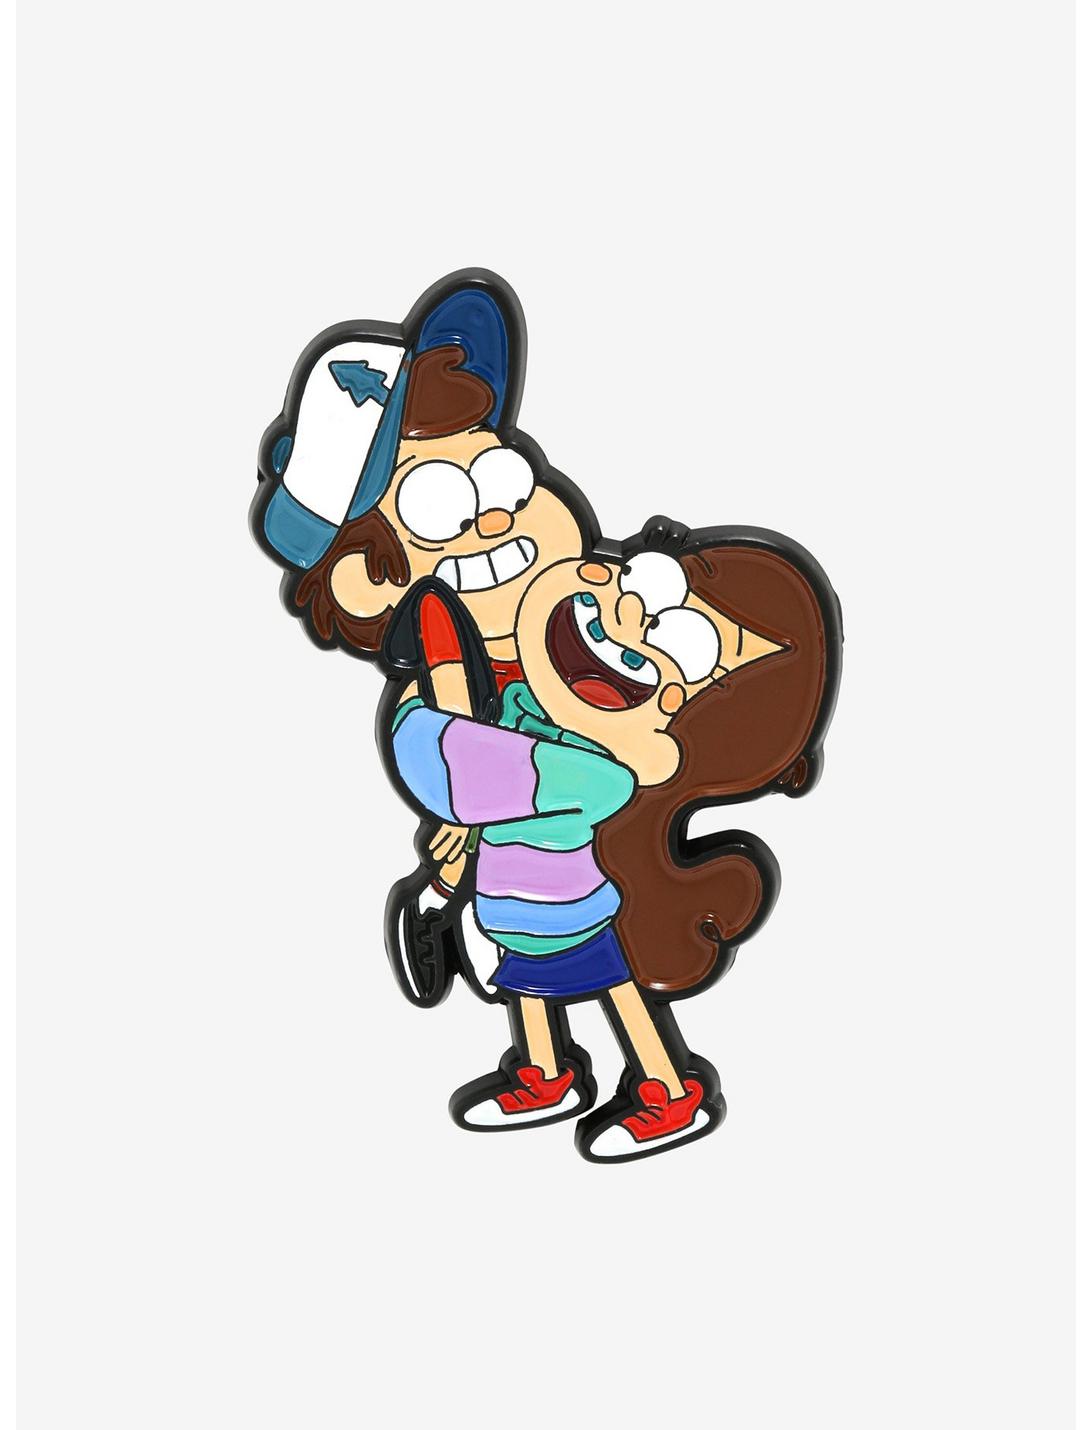 Gravity Falls Dipper & Mable Enamel Pin - BoxLunch Exclusive, , hi-res